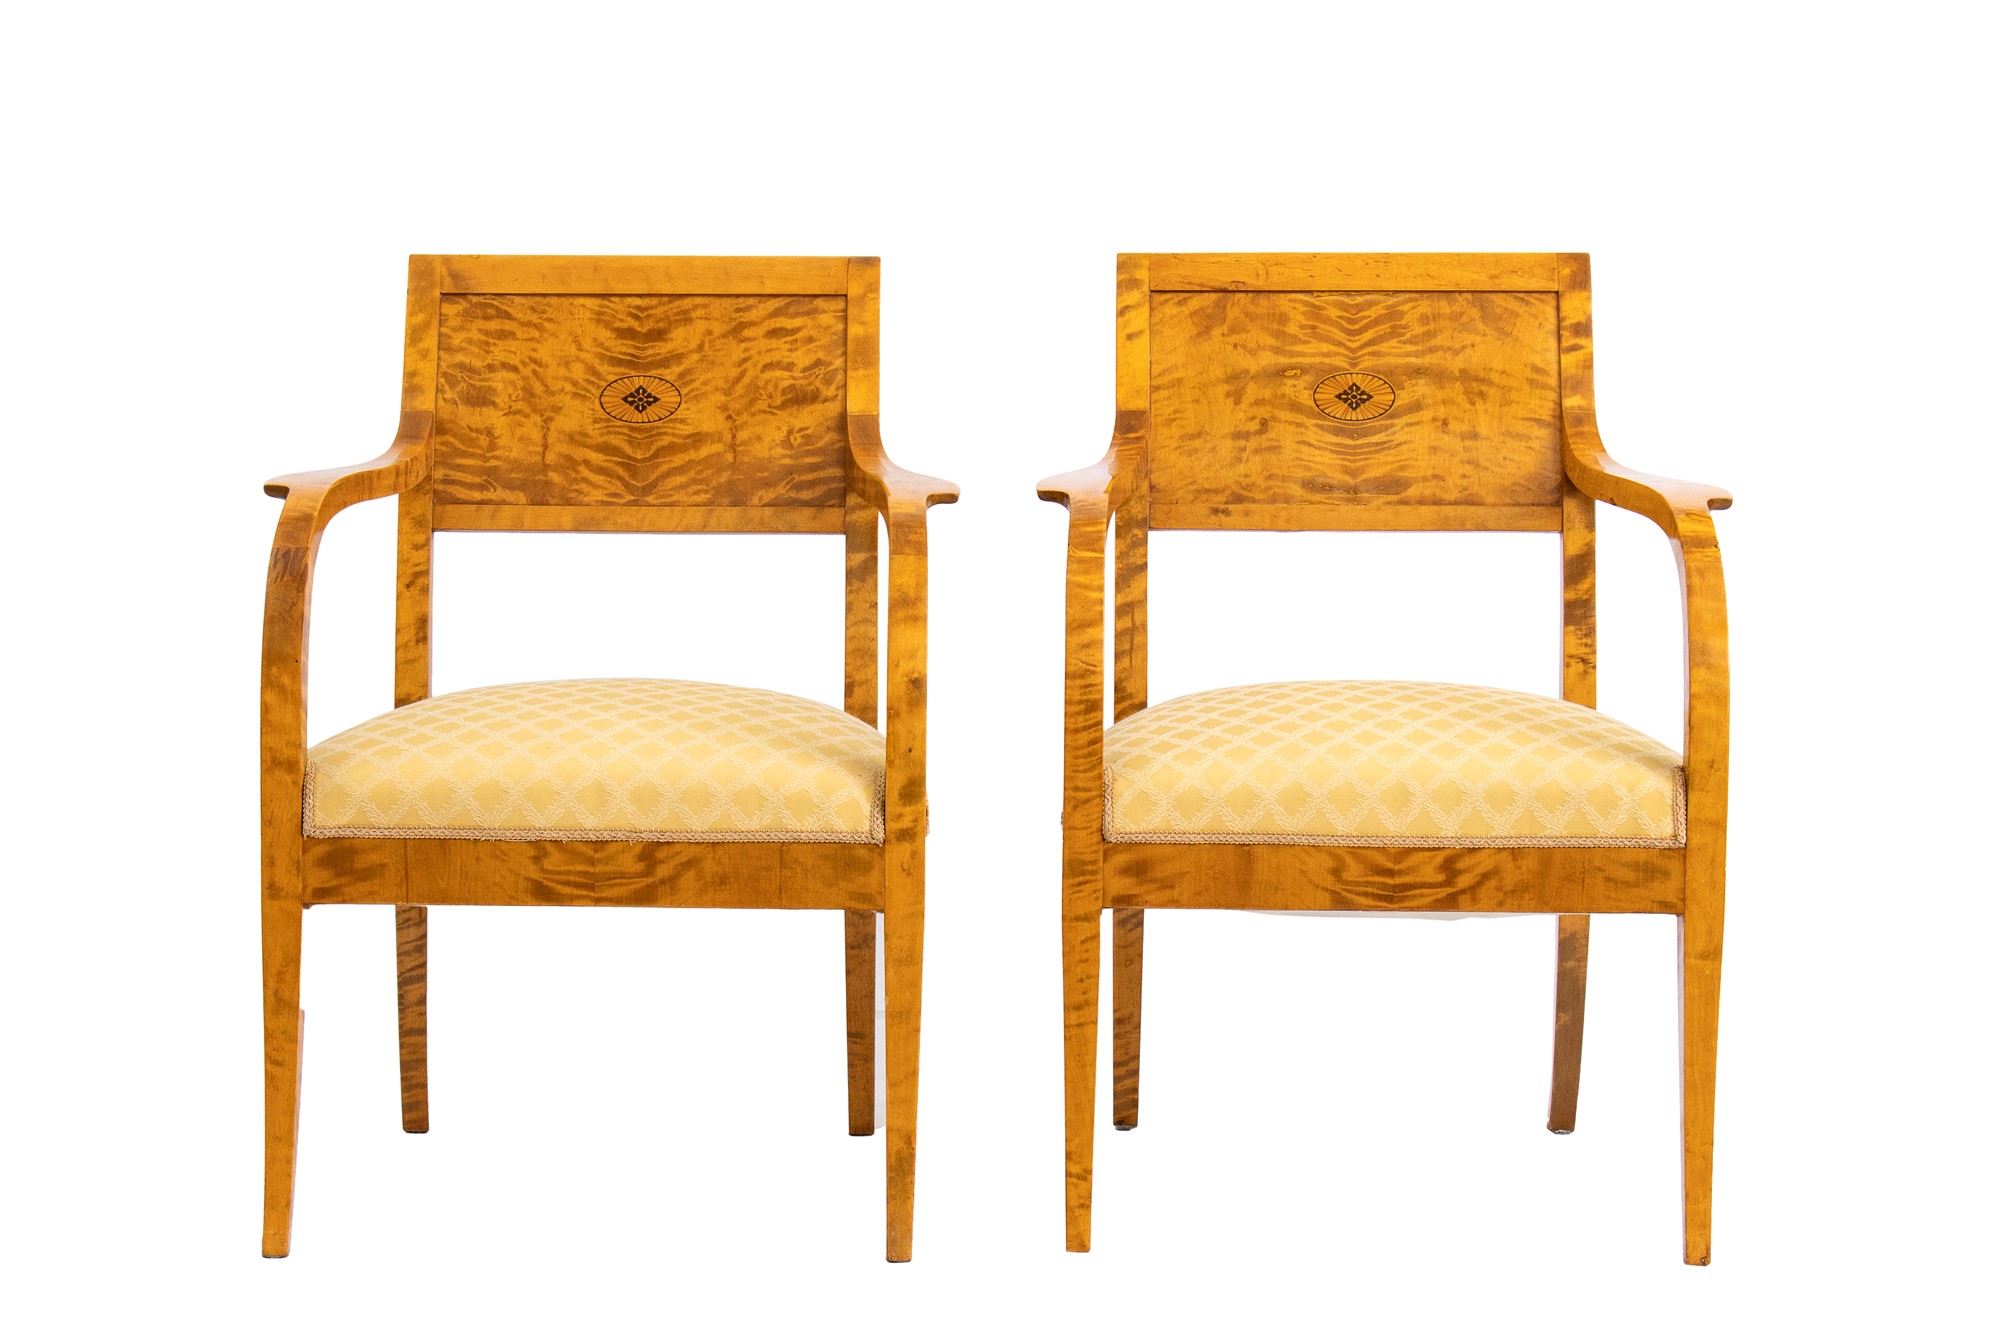 Pair of chairs Biedermeier with back carved in geometric decor with ebonized woods. - Image 3 of 19